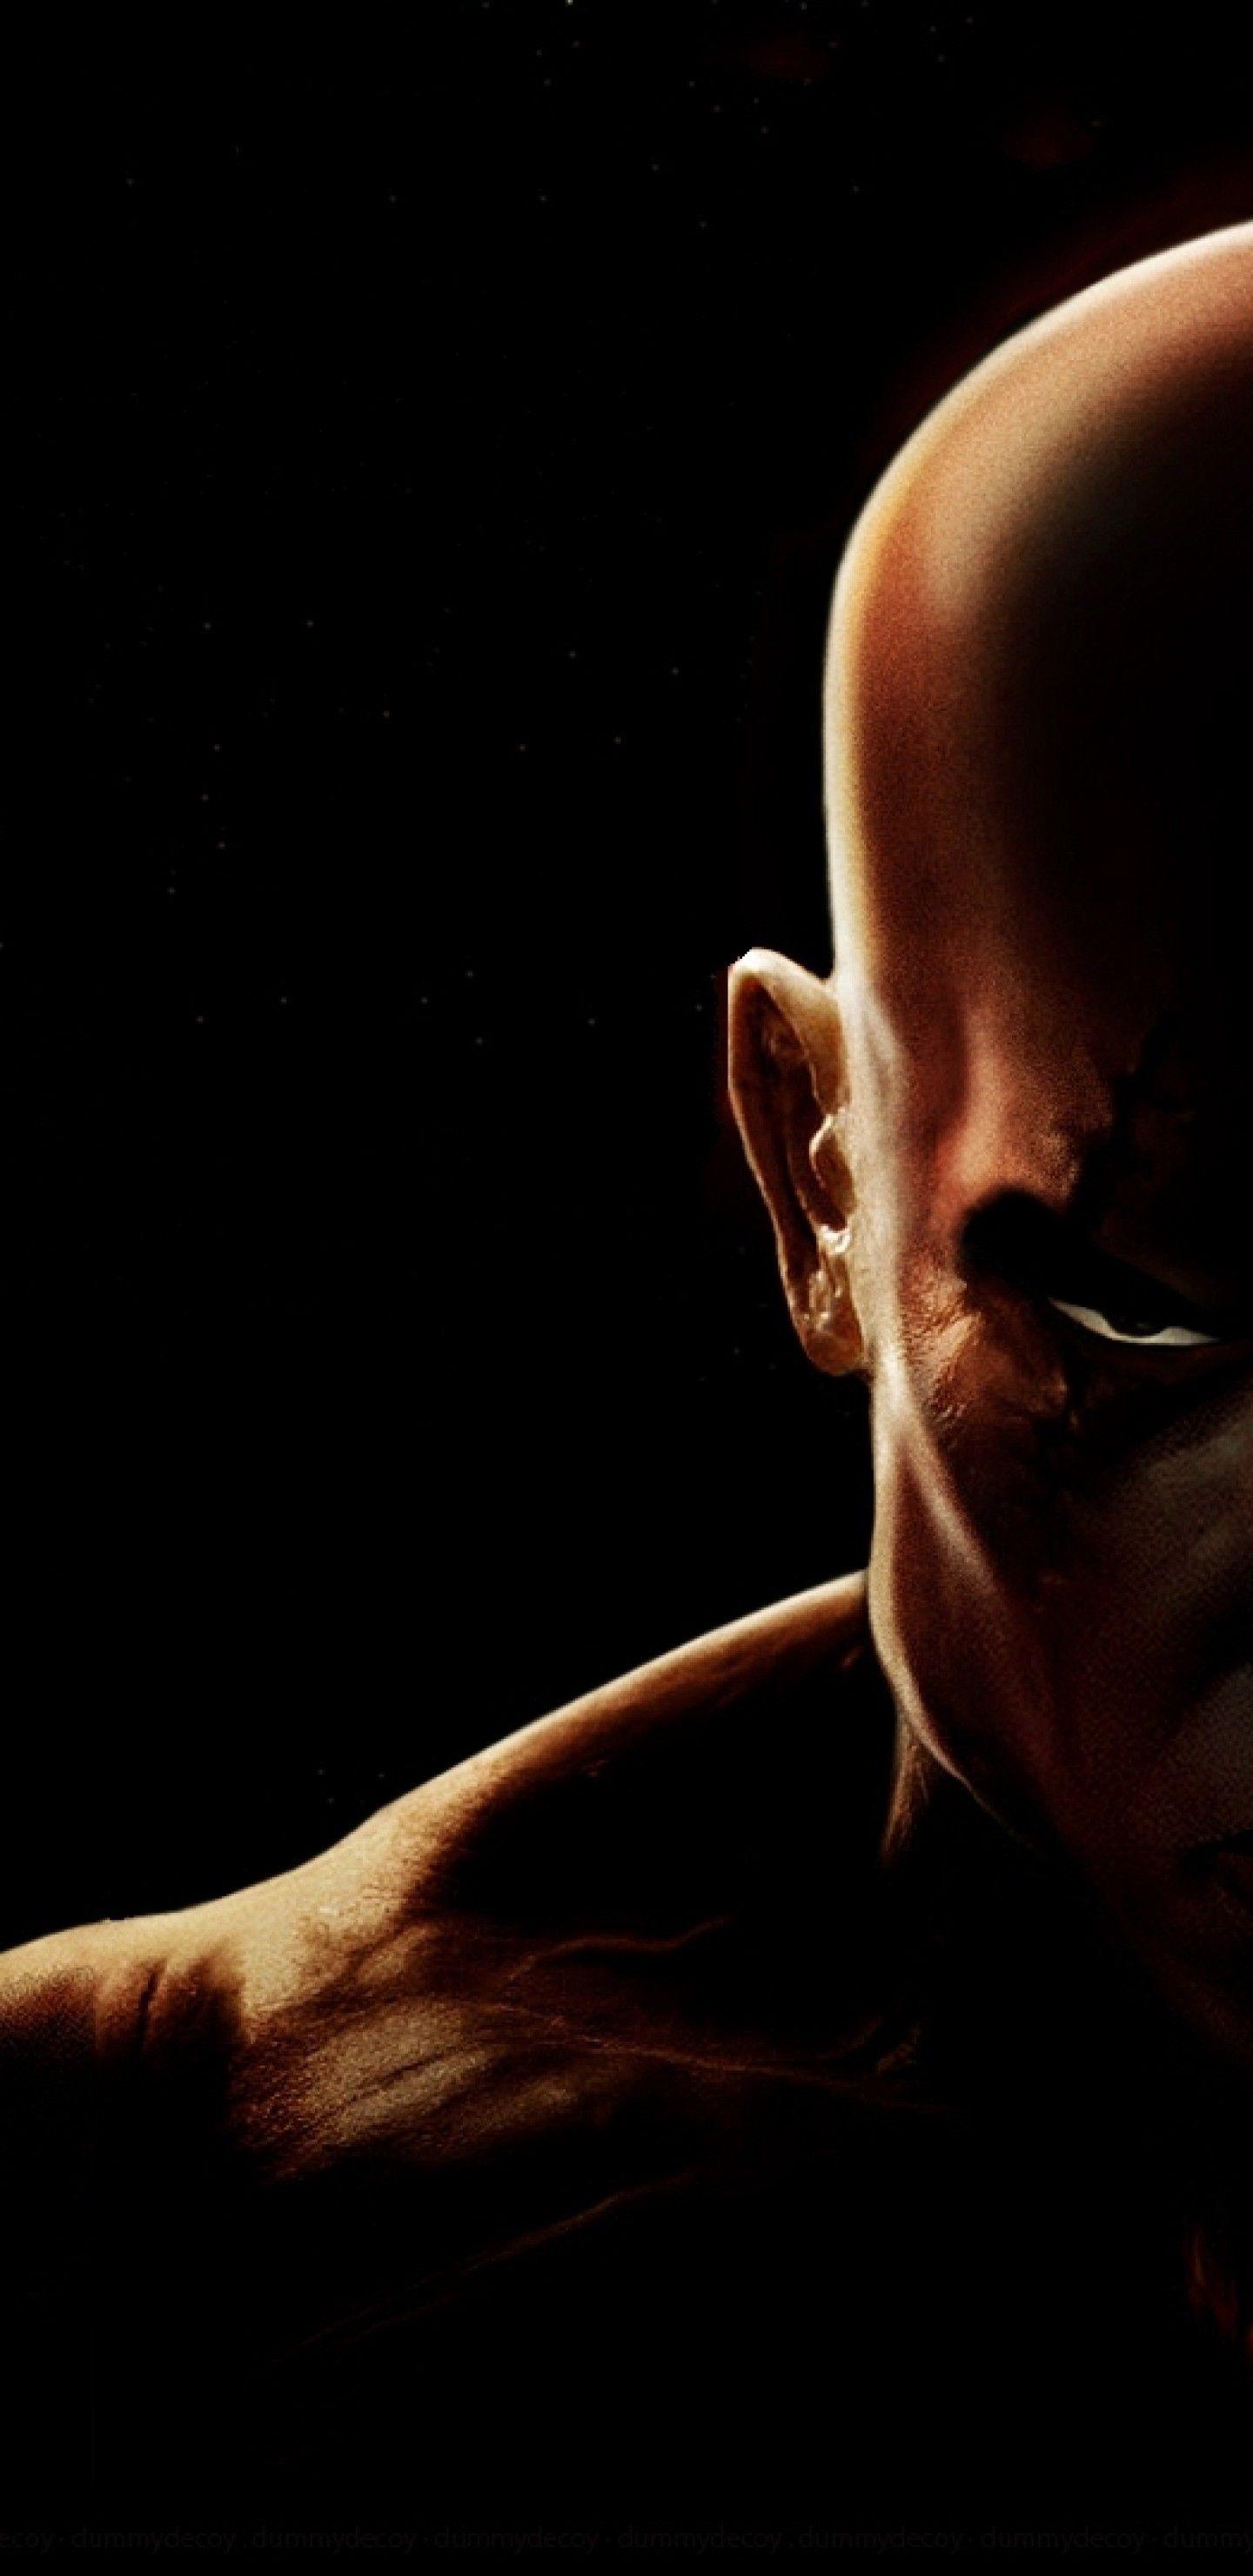 Download 1440x2960 Kratos, God Of War, Angry Wallpaper for Samsung